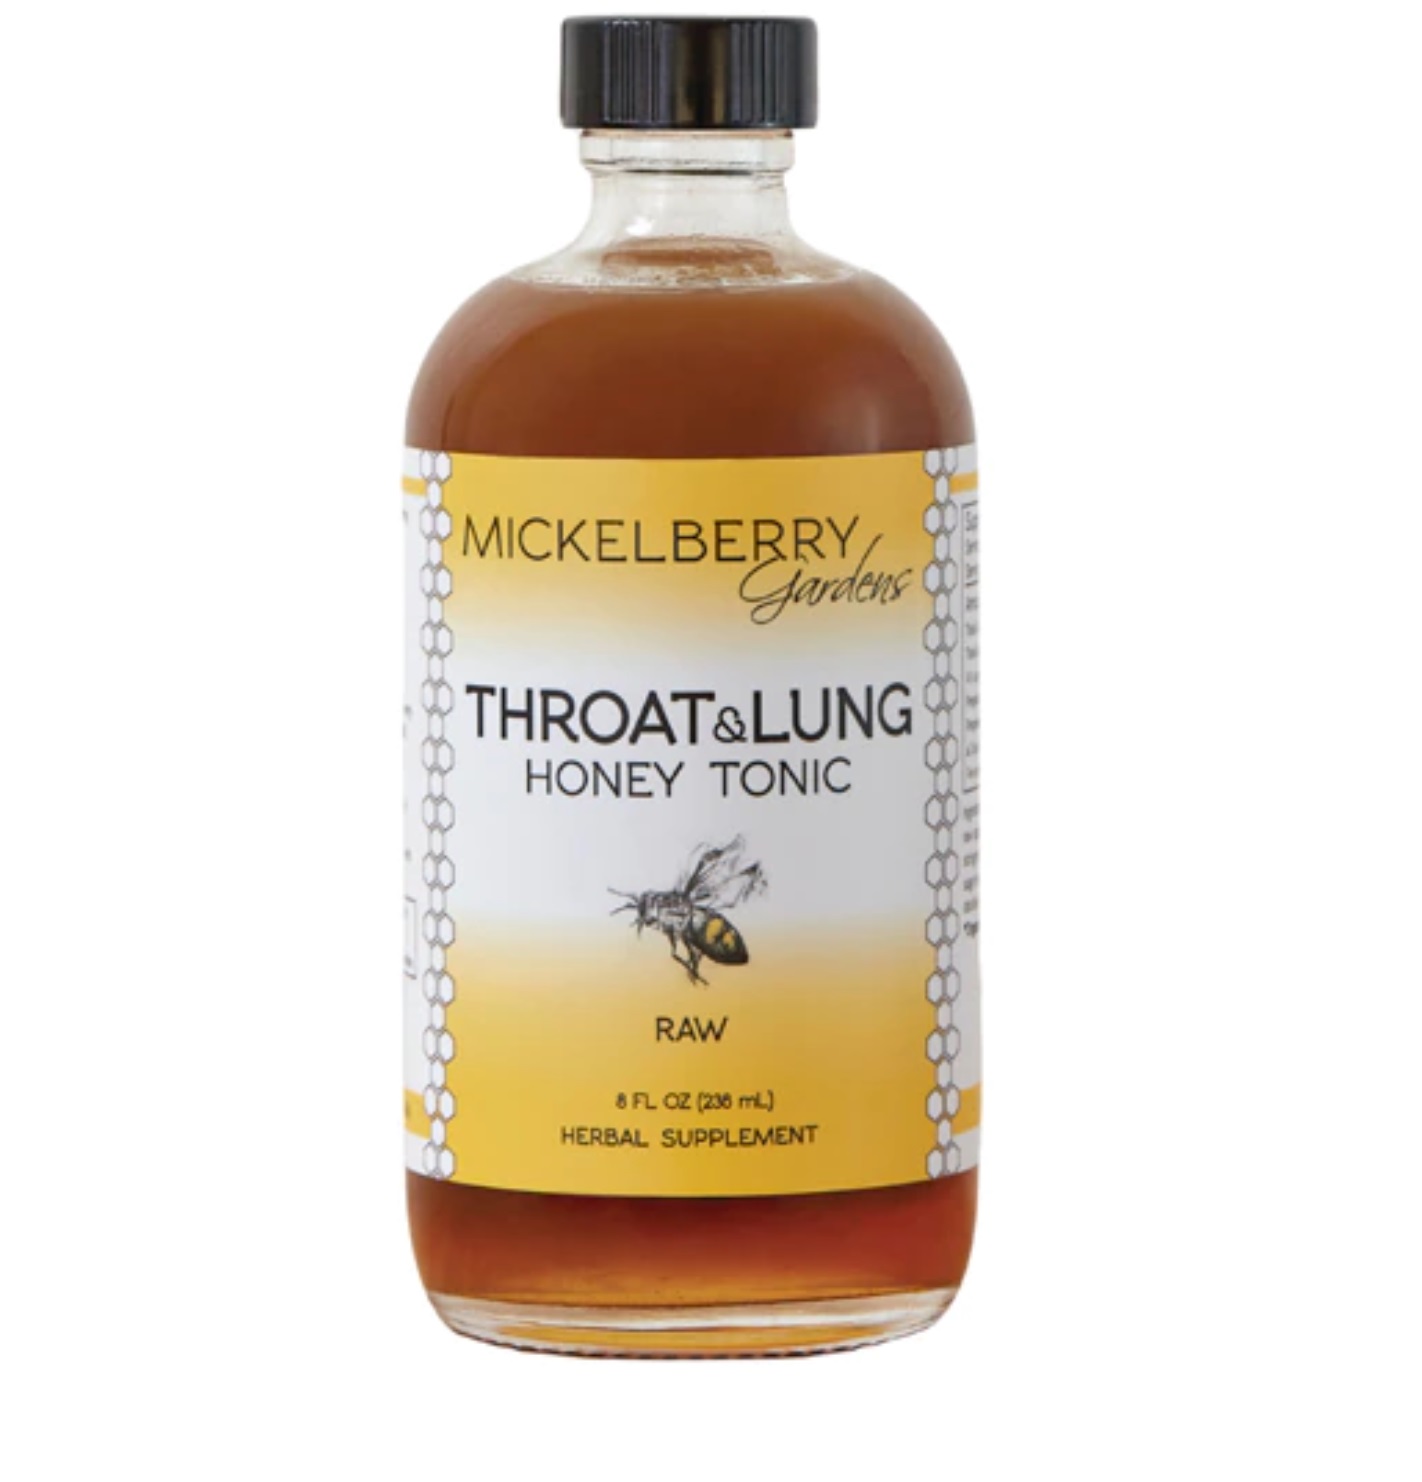 Image of Throat and Lung Honey Tonic